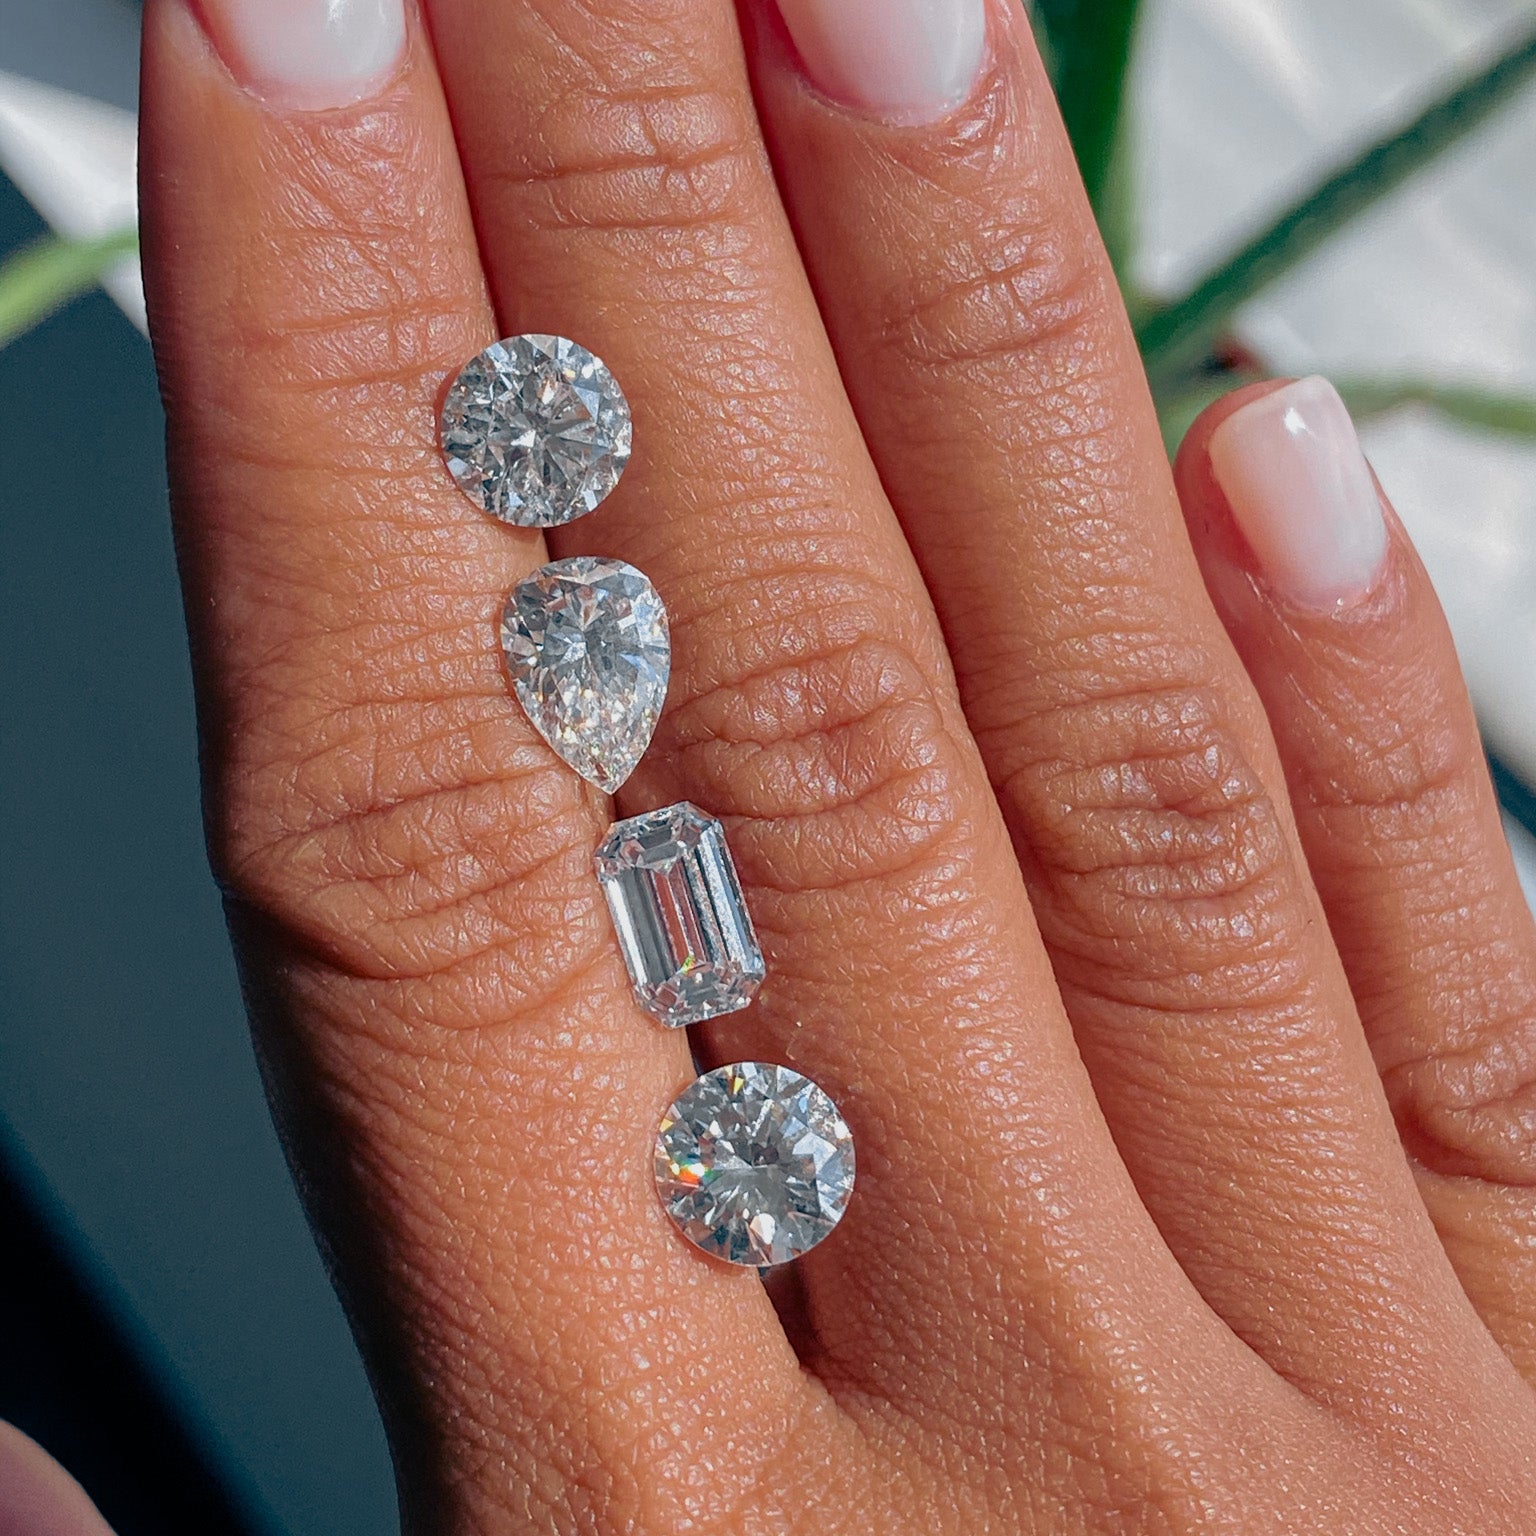 Custom-Made Diamond Jewelry to Match Your Personal Style This Holiday Season